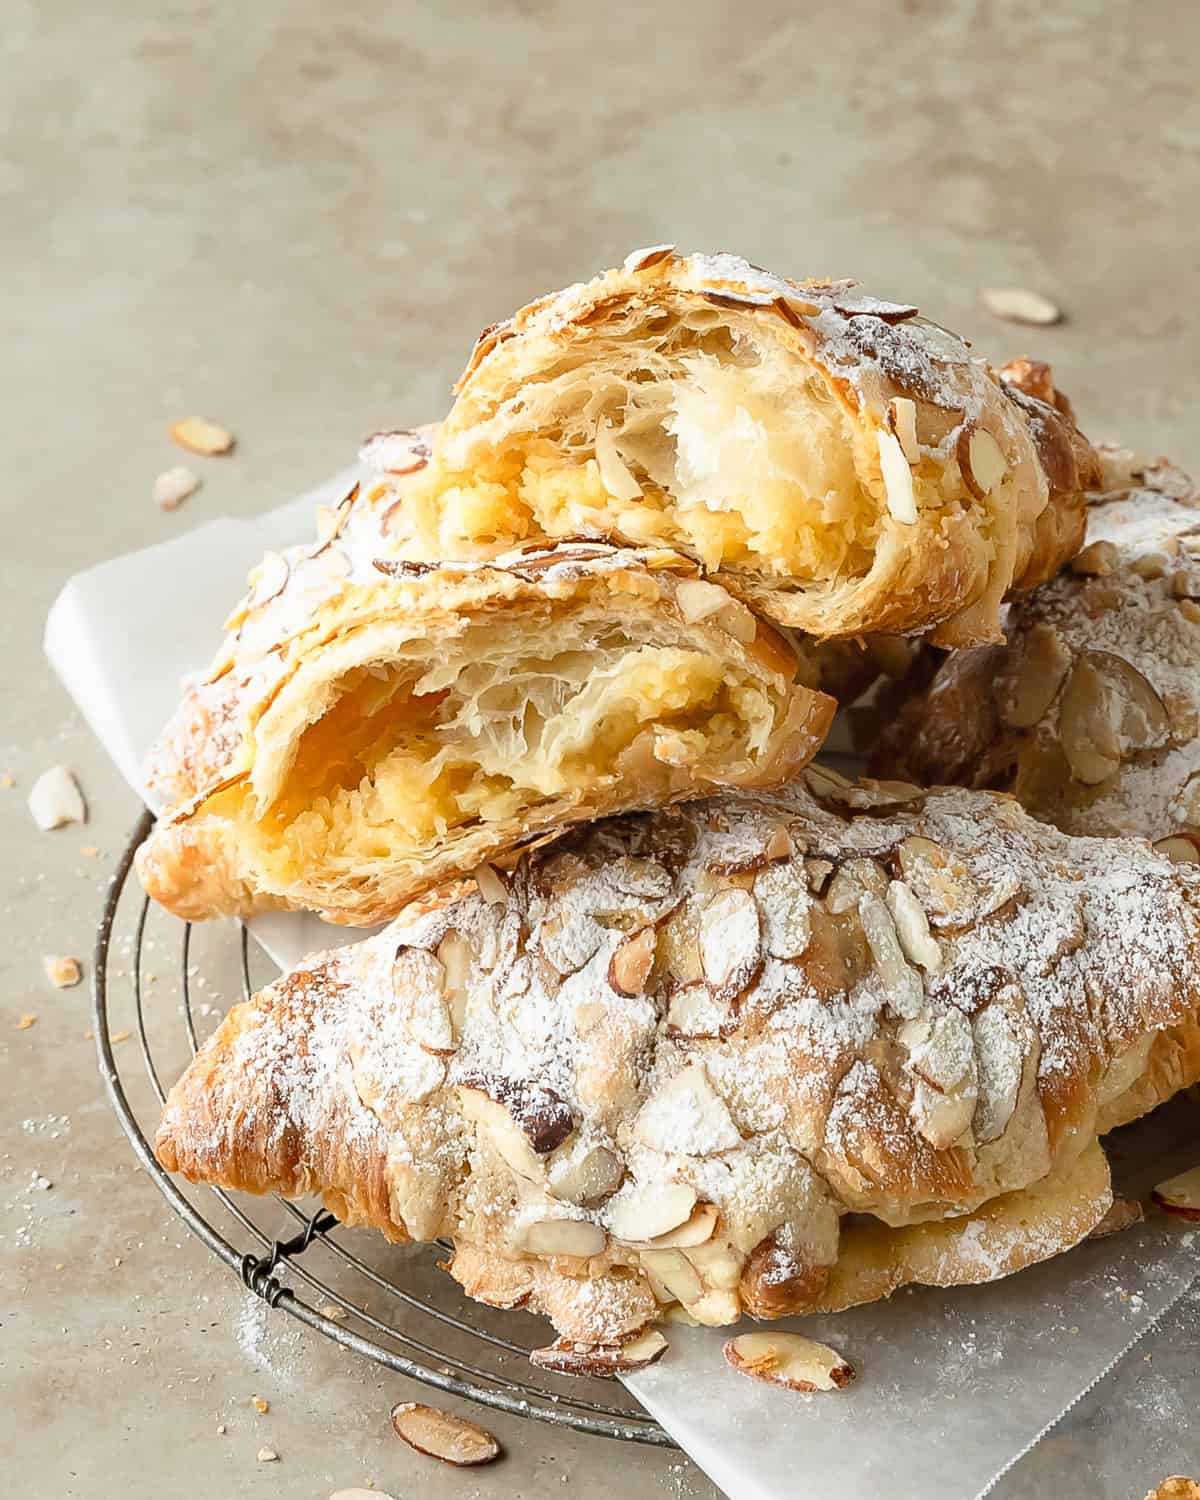 Almond croissants are an easy to make version of the classic french pastry, croissants aux amandes. This quick almond croissant recipe uses day old store bought croissants, filled with a homemade almond pastry cream, topped with a sweet almond syrup. Skip the fancy french bakery and make these buttery almond filled croissants for the perfect breakfast or brunch treat.